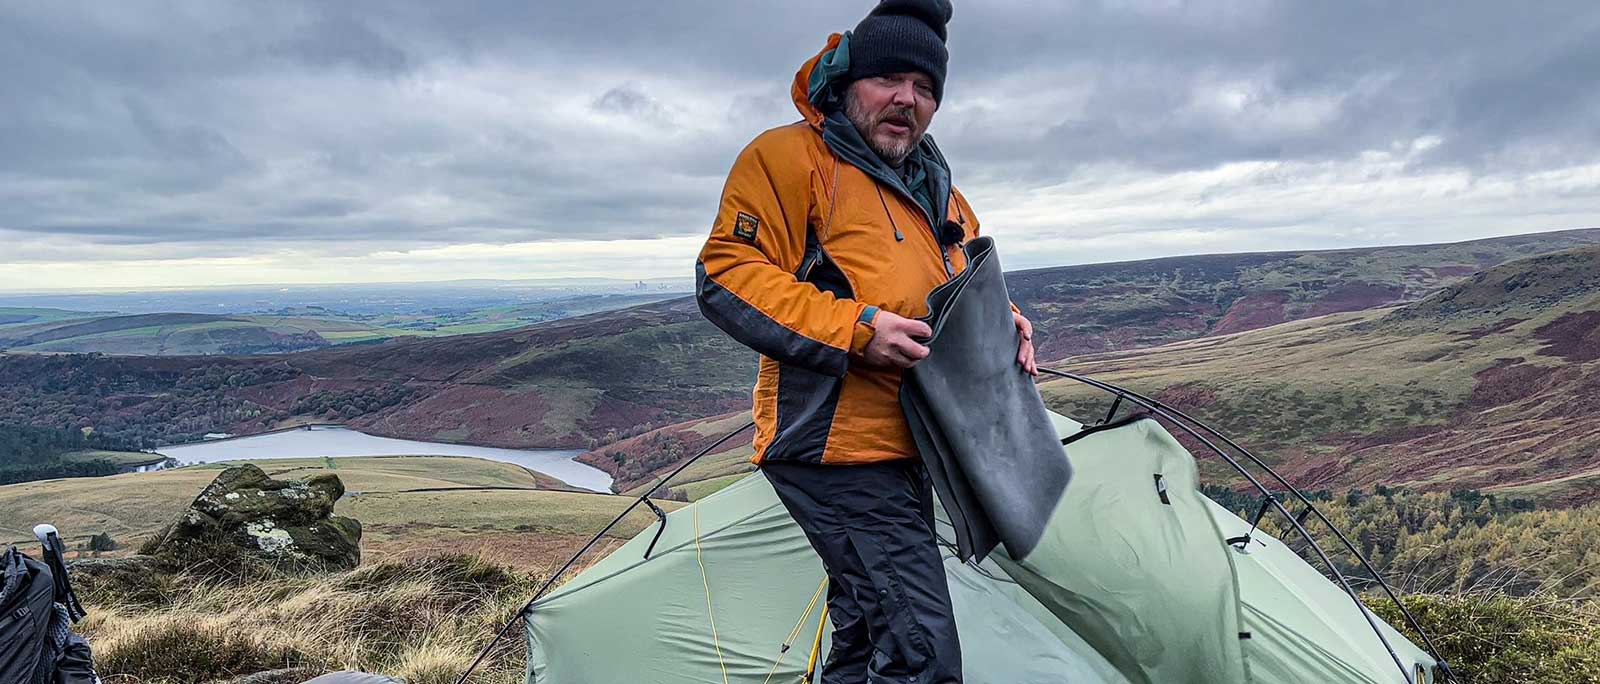 Interview: Wild Camping YouTuber Paul Messner